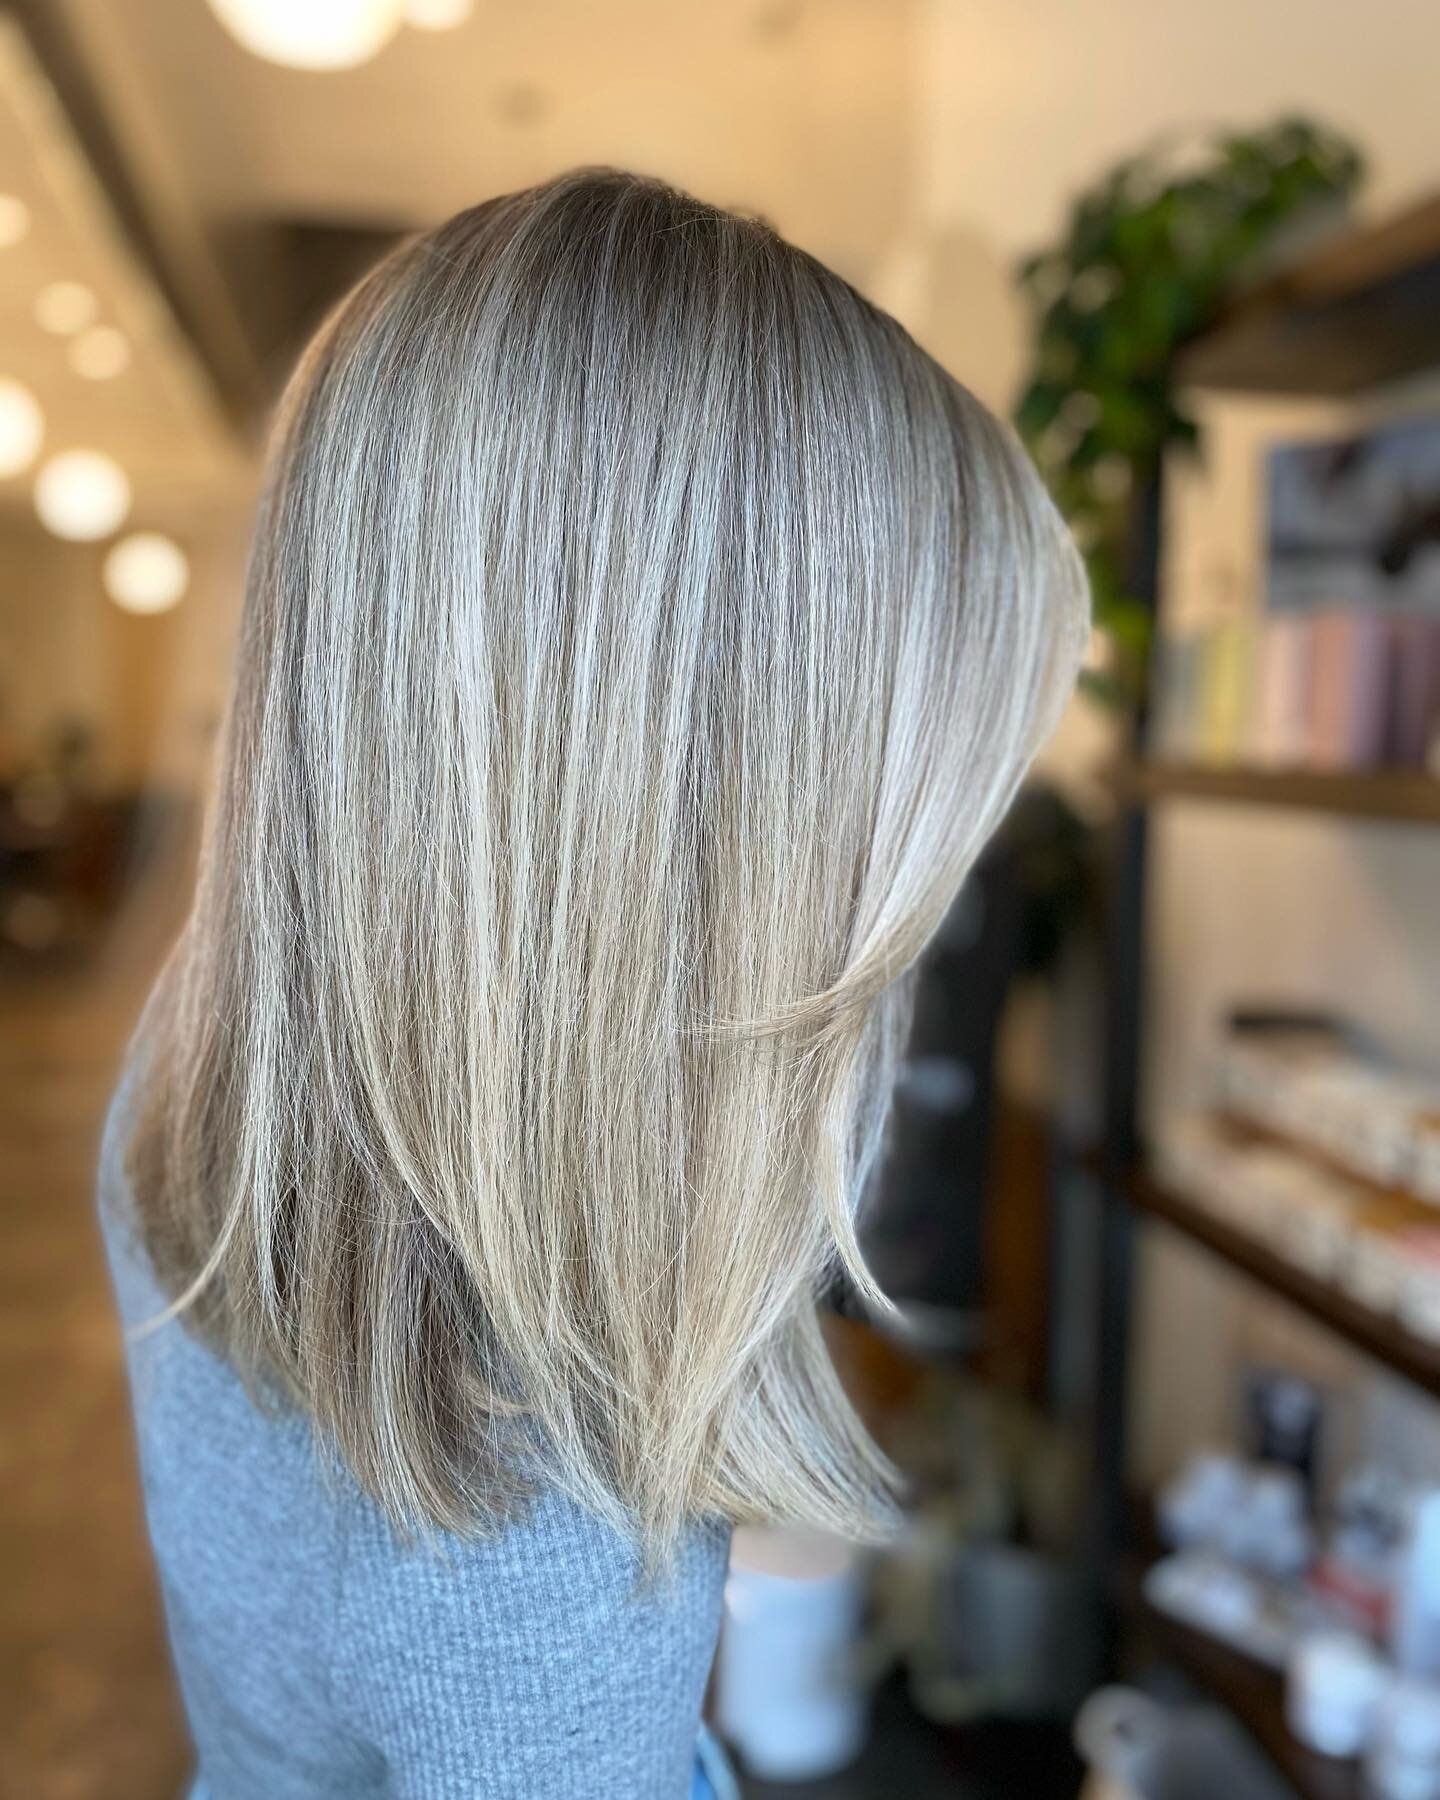 Highlights✨teasy lights✨balayage-oh my!

Gone are the days of cookie cutter foils to create a look. Most times I&rsquo;m doing 2, if not 3 or 4 different techniques in one sitting! I love that we have so many ways to create truly custom color for our